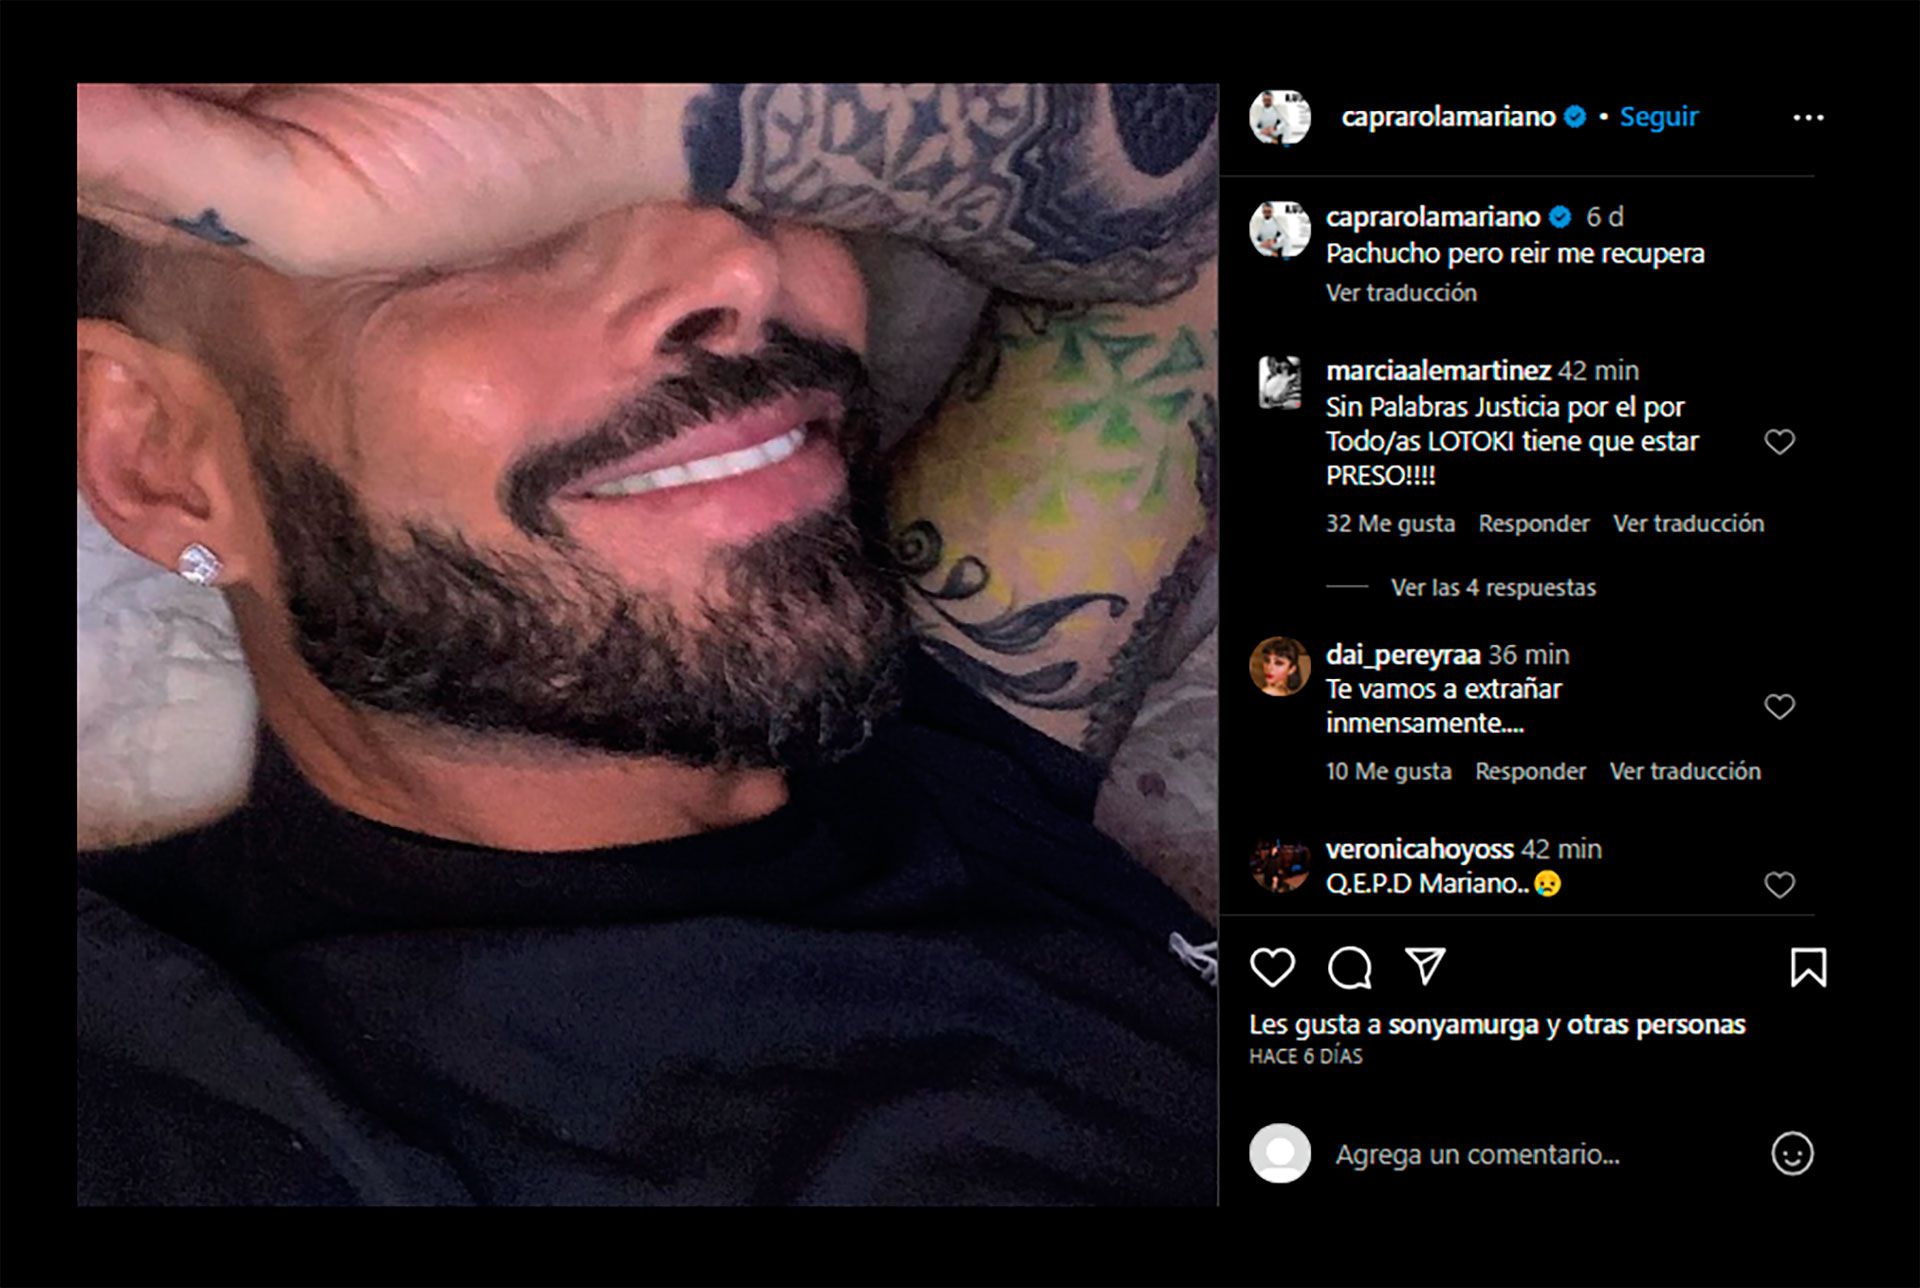 Two of Mariano Caprarola's latest messages on social networks gave an account of his state of health (Photos: Instagram)